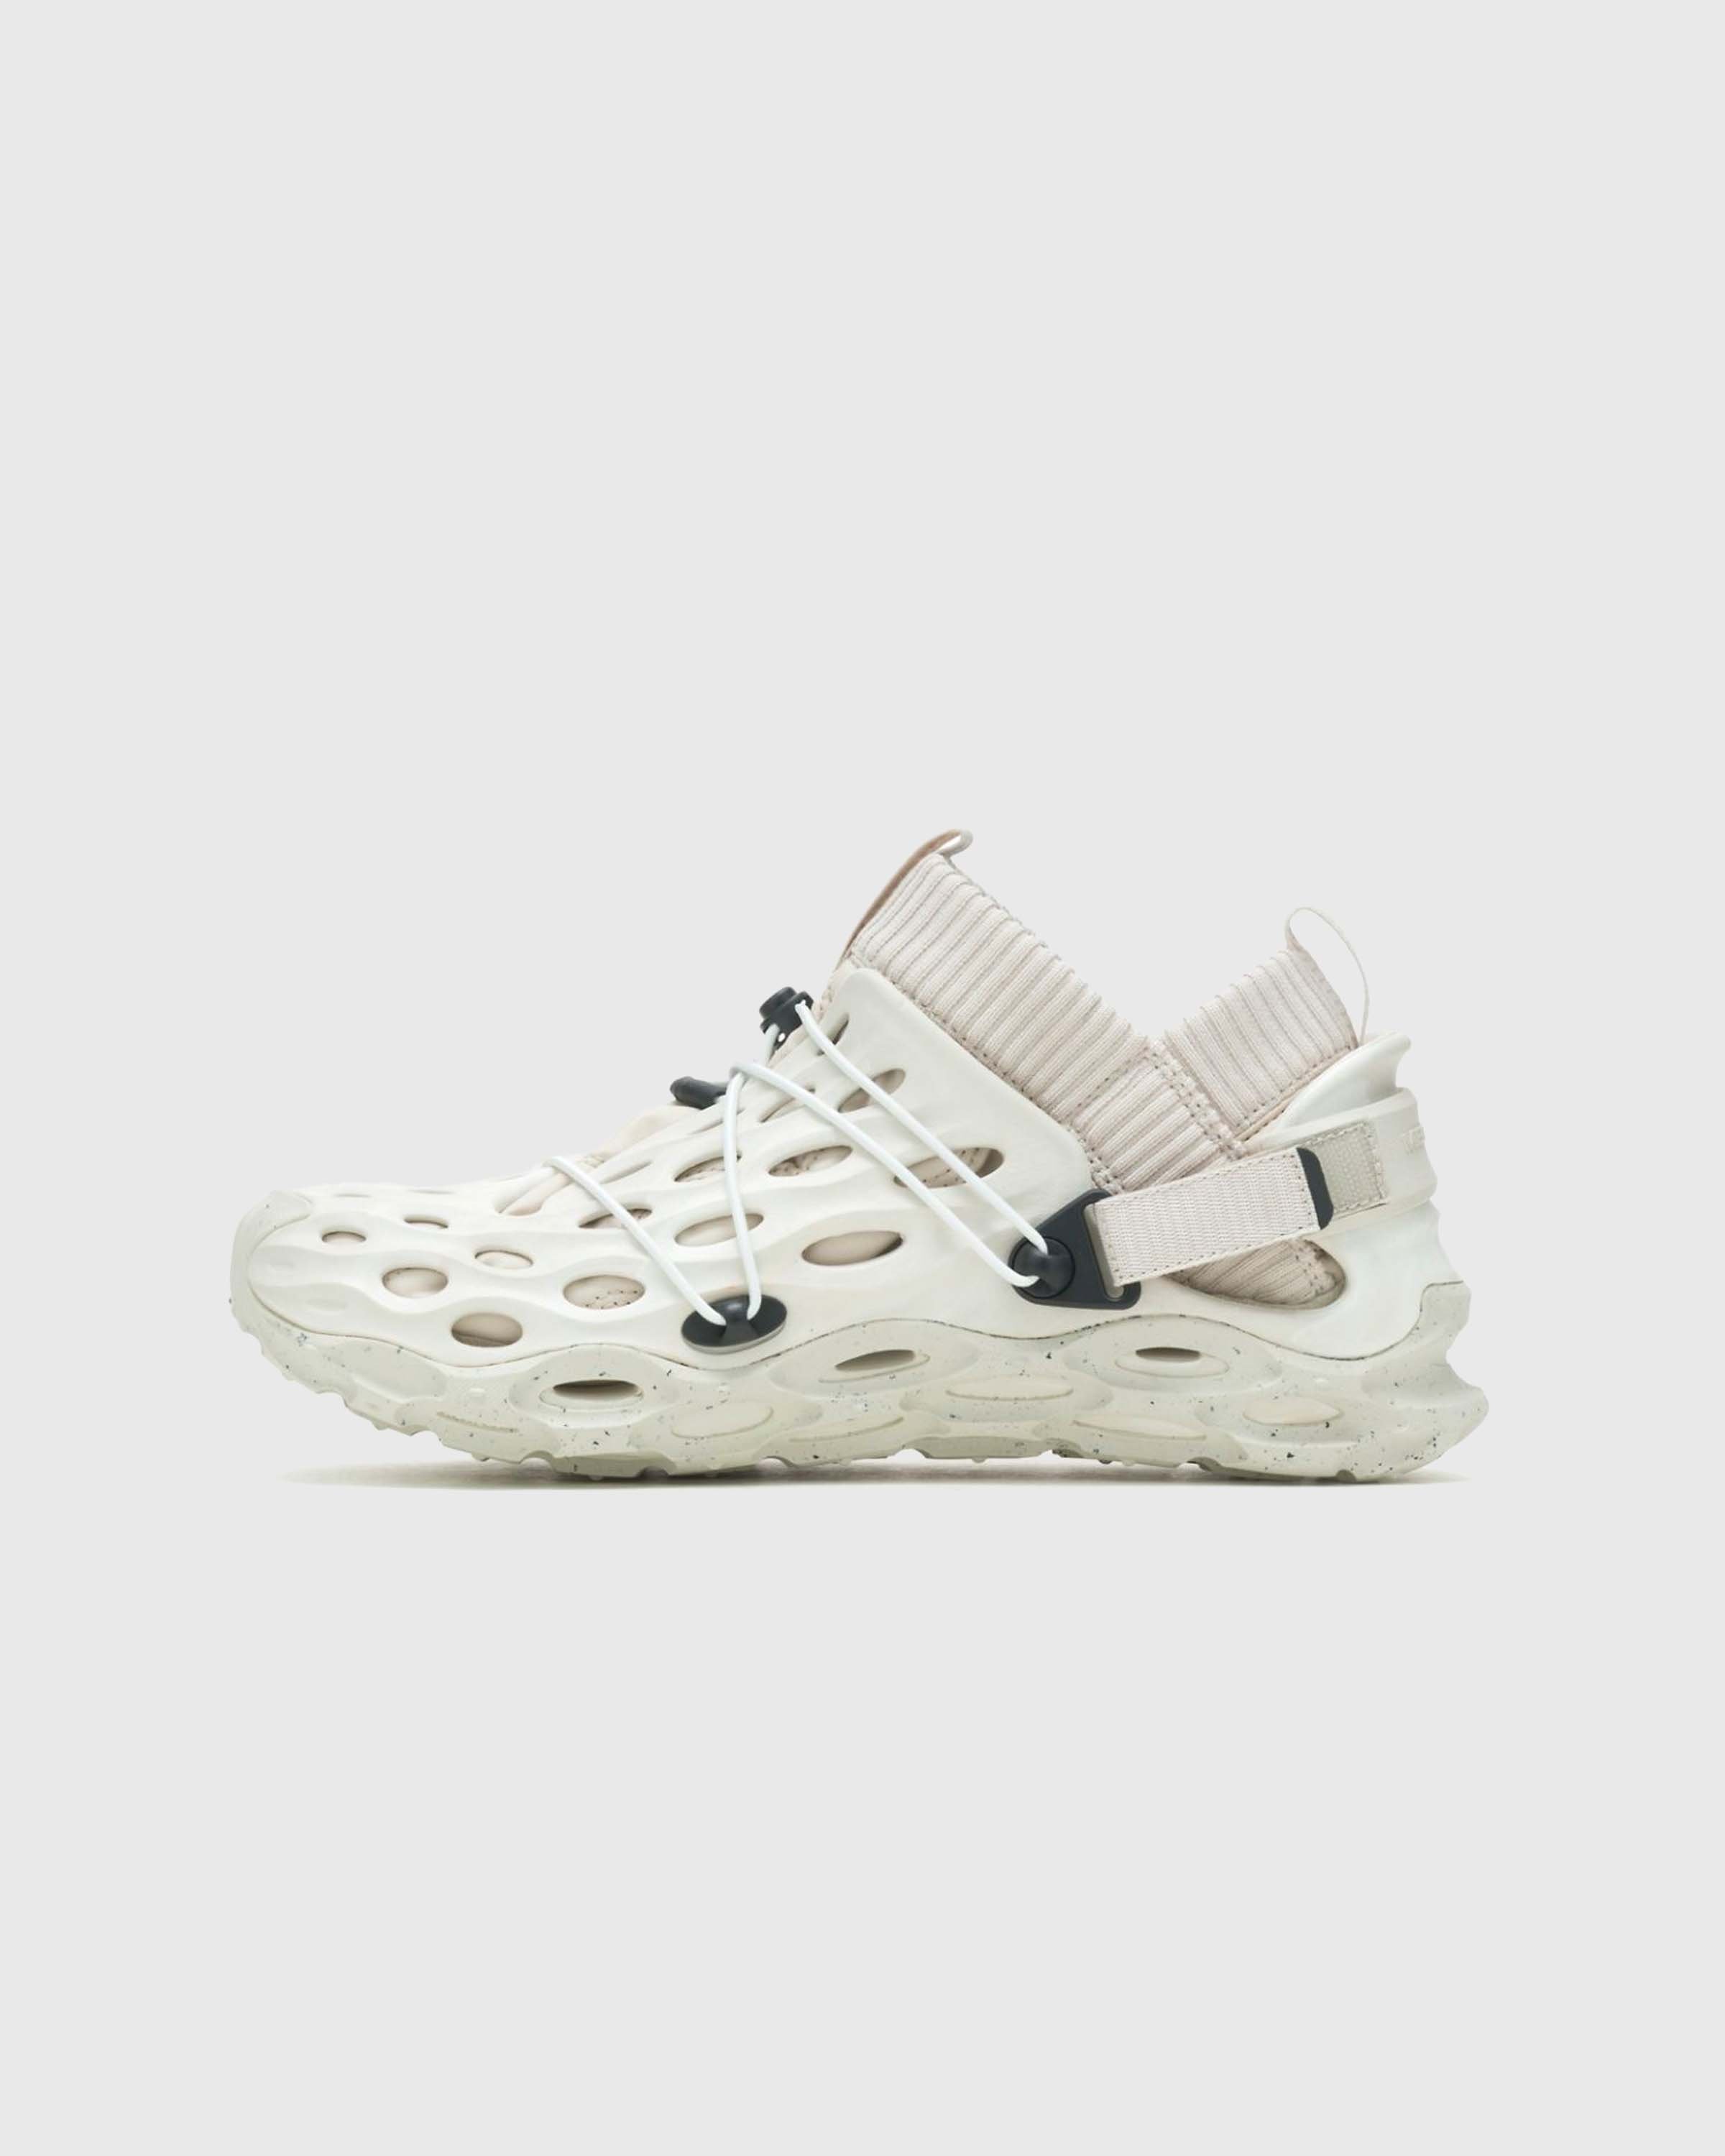 Merrell - Hydro Moc AT Ripstop 1TRL White - Footwear - White - Image 2